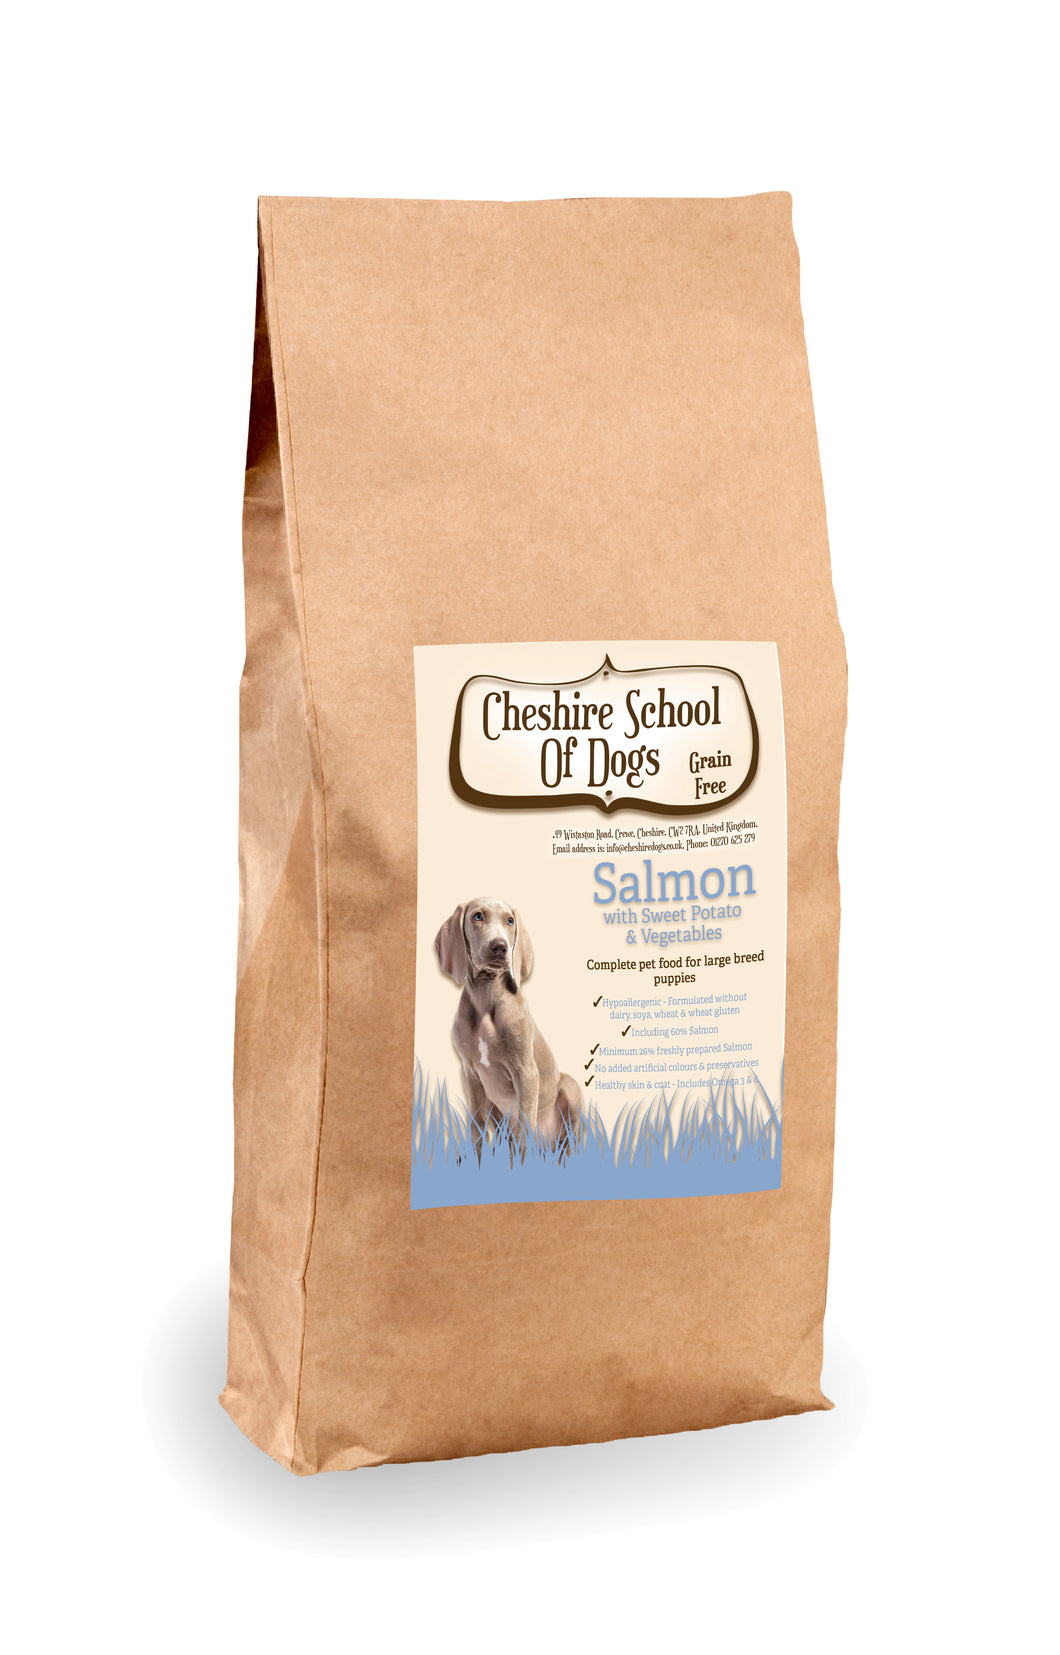 Grain Free - Salmon with Sweet Potato & Vegetables - Complete PUPPY food for large breeds